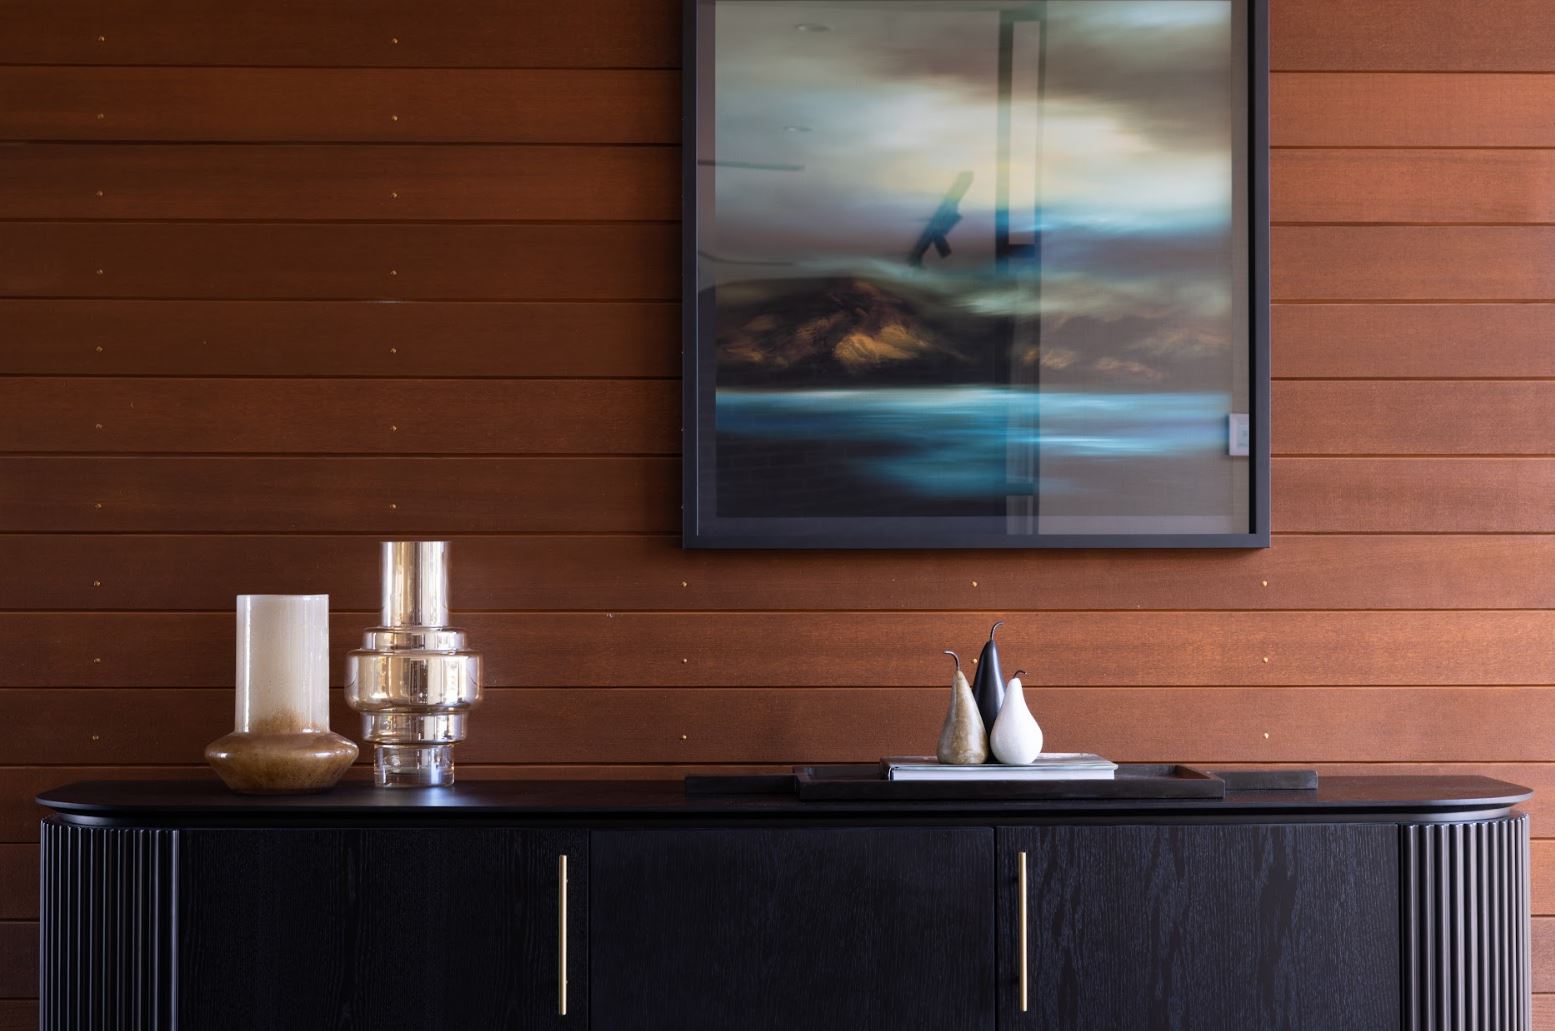 Explore Hallmark Homes' Oakridge Showhome in Marshlands Christchurch NZ, a beautiful showcase of luxurious finishes and innovative design by Architect Phil Bidwell.